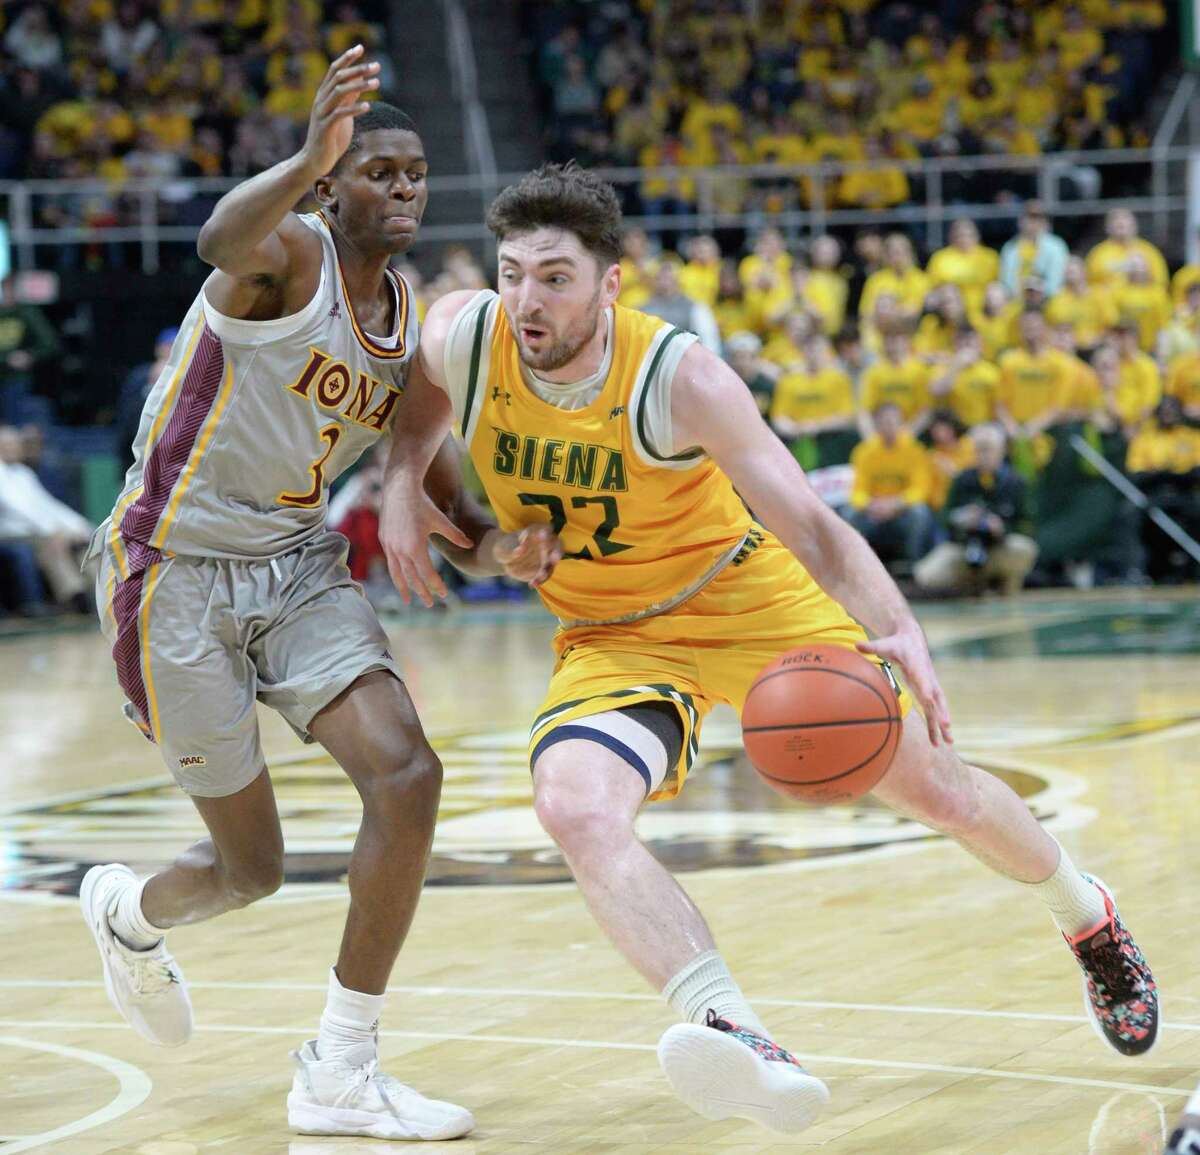 Siena’s Andrew Platek drives the ball past Iona’s Cruz Davis during a game at MVP Arena in Albany, N.Y. on Friday, Jan. 27, 2023. (Jenn March, Special to the Times Union)